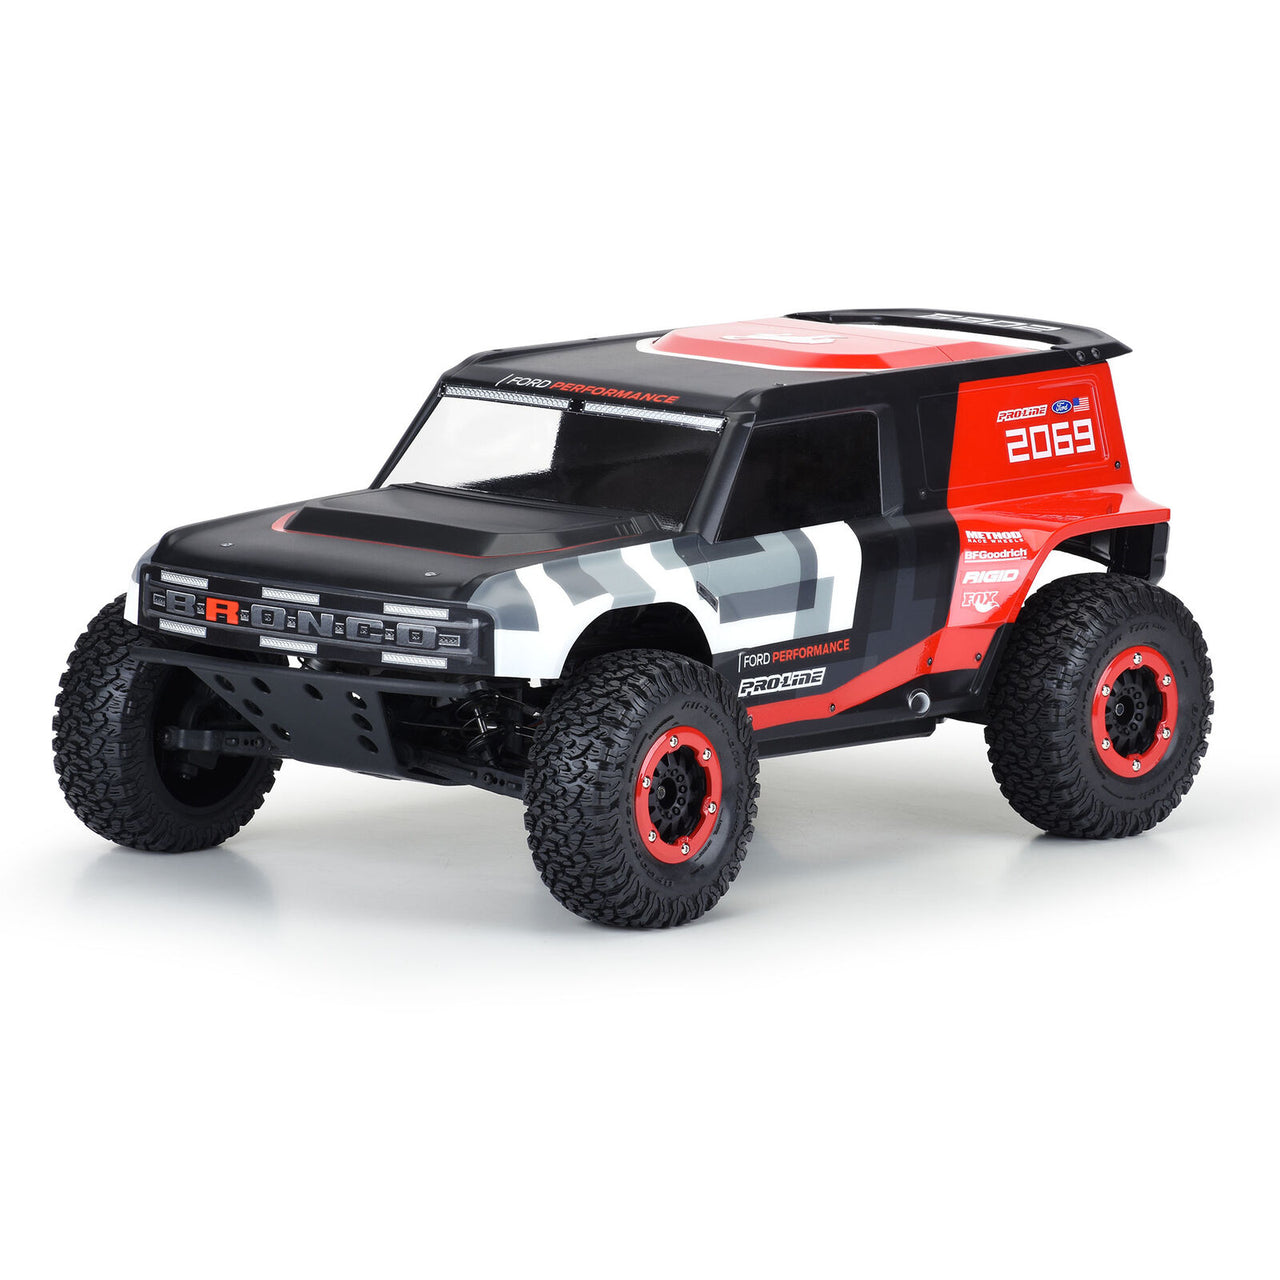 PRO358600 1/10 Ford Bronco R Clear Body: Short Course